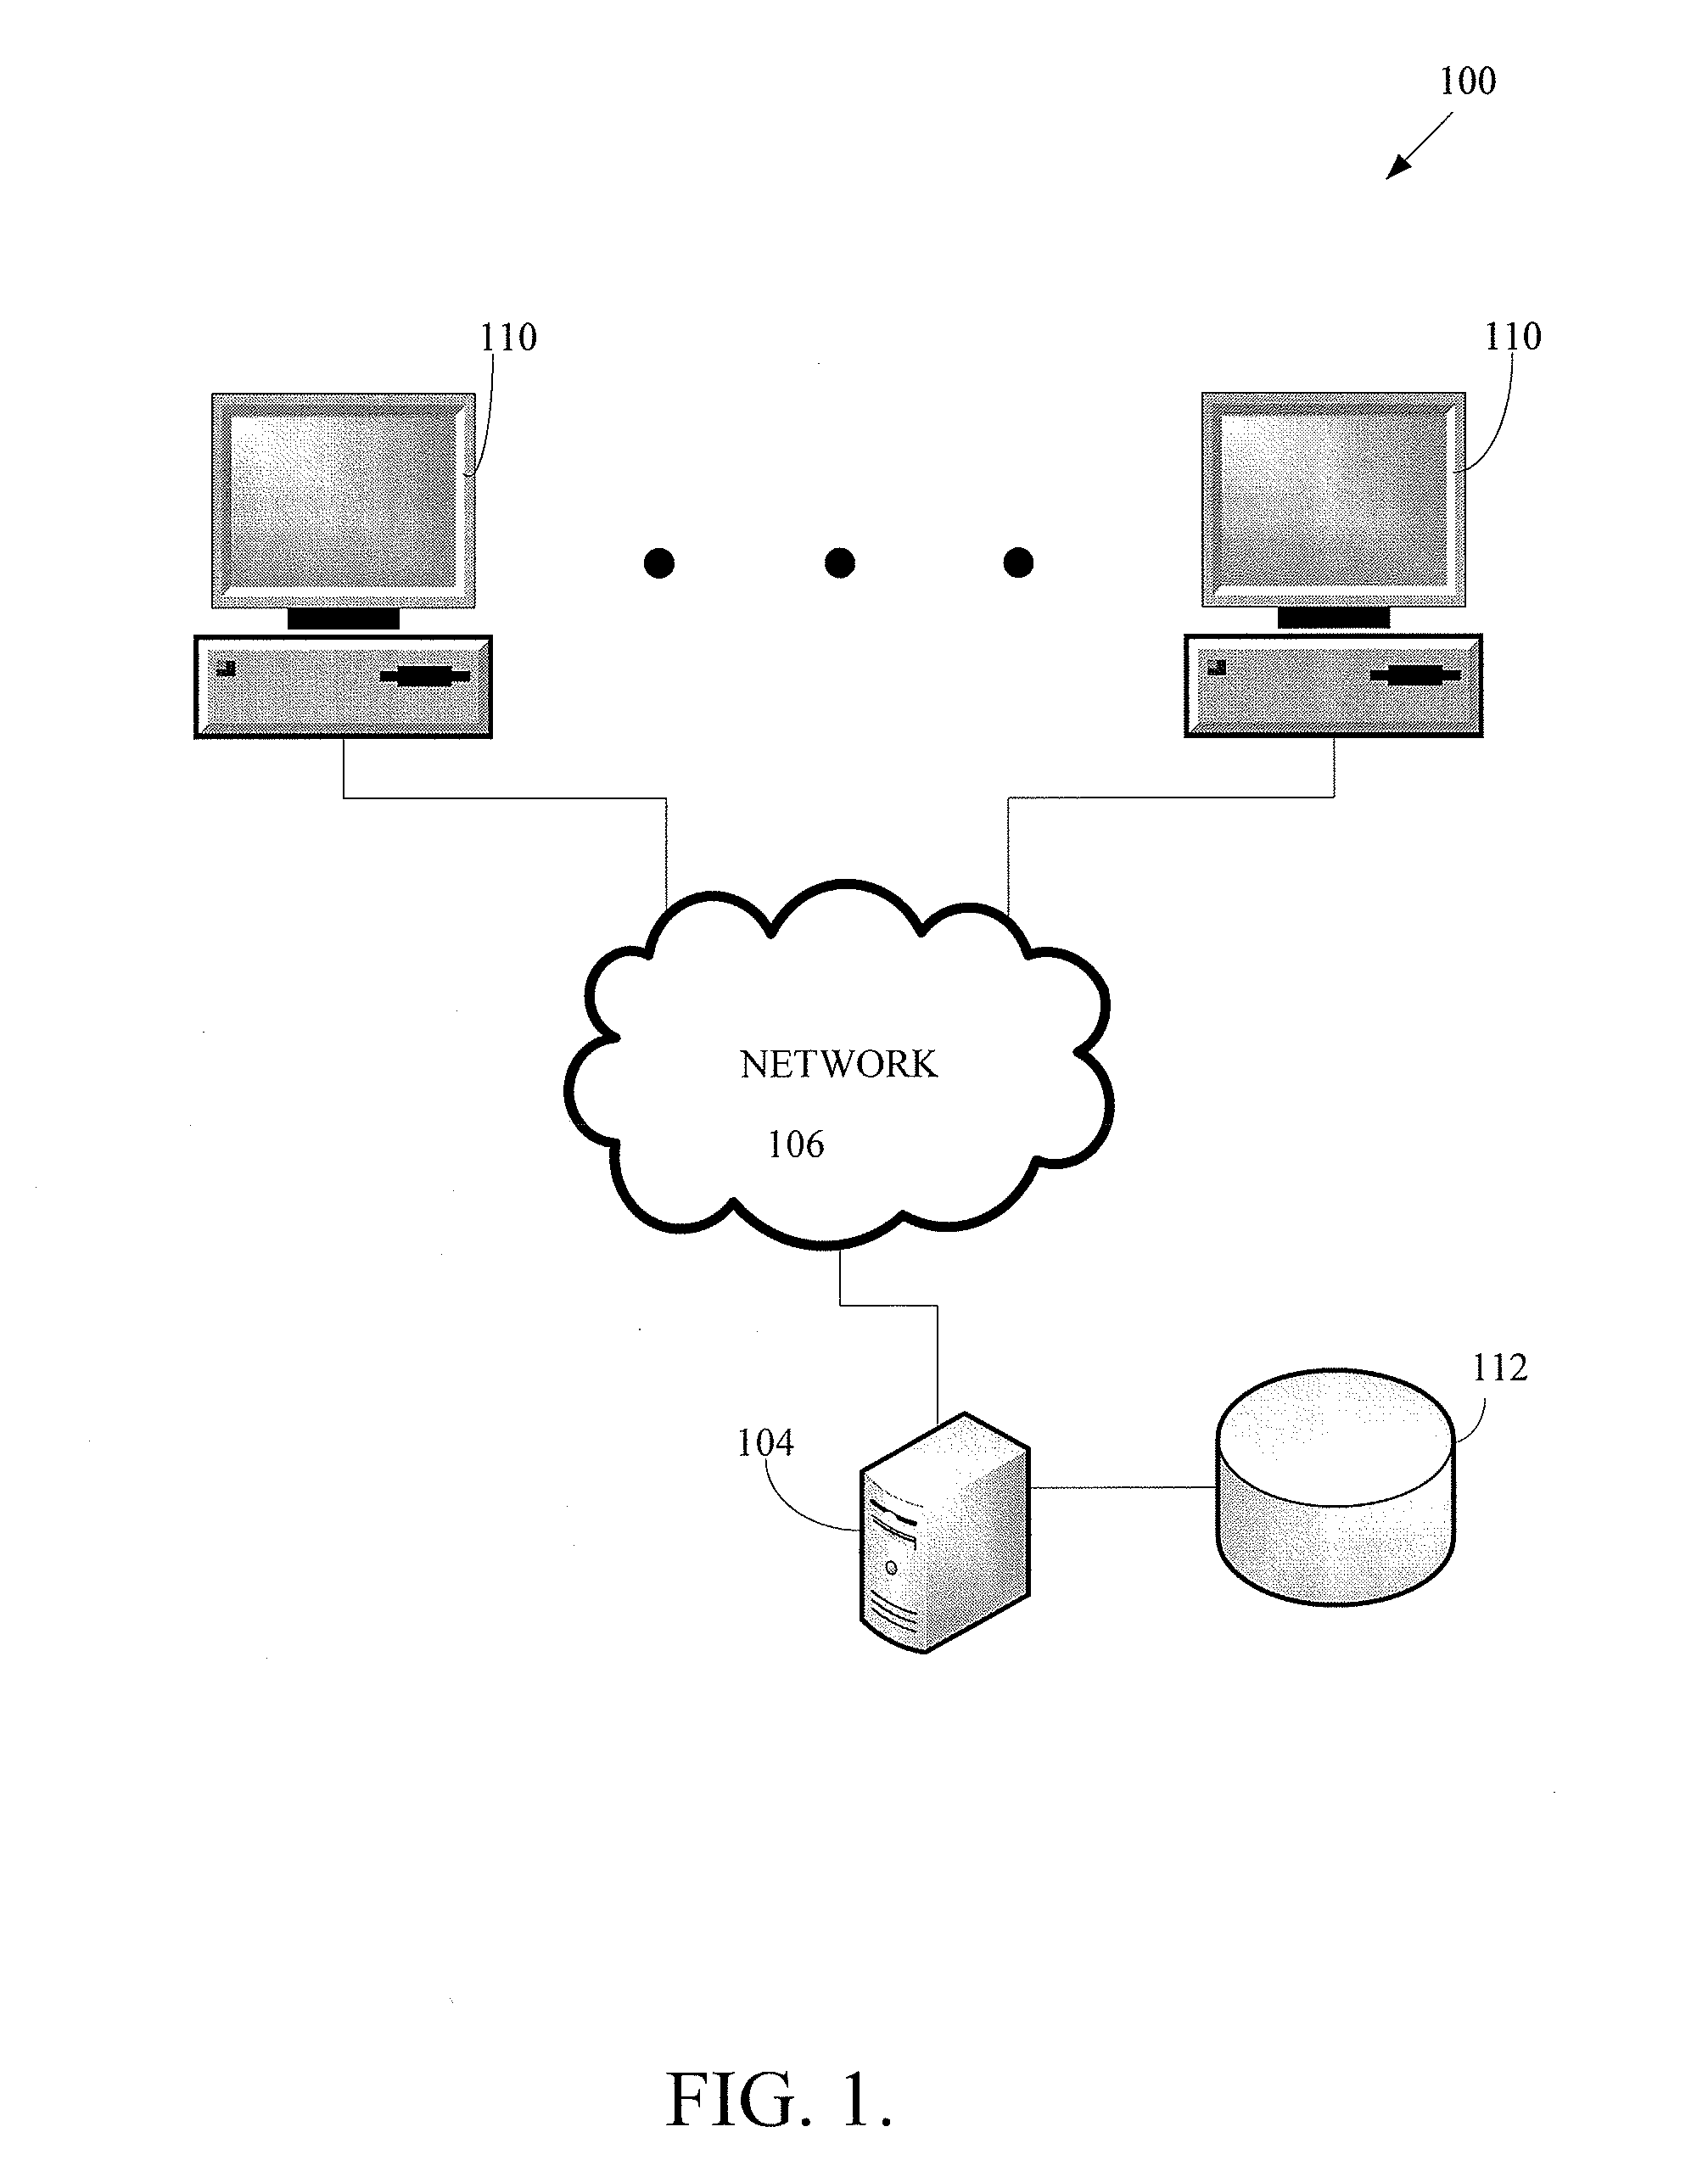 Methods and systems for compiling communication fragments and creating effective communication